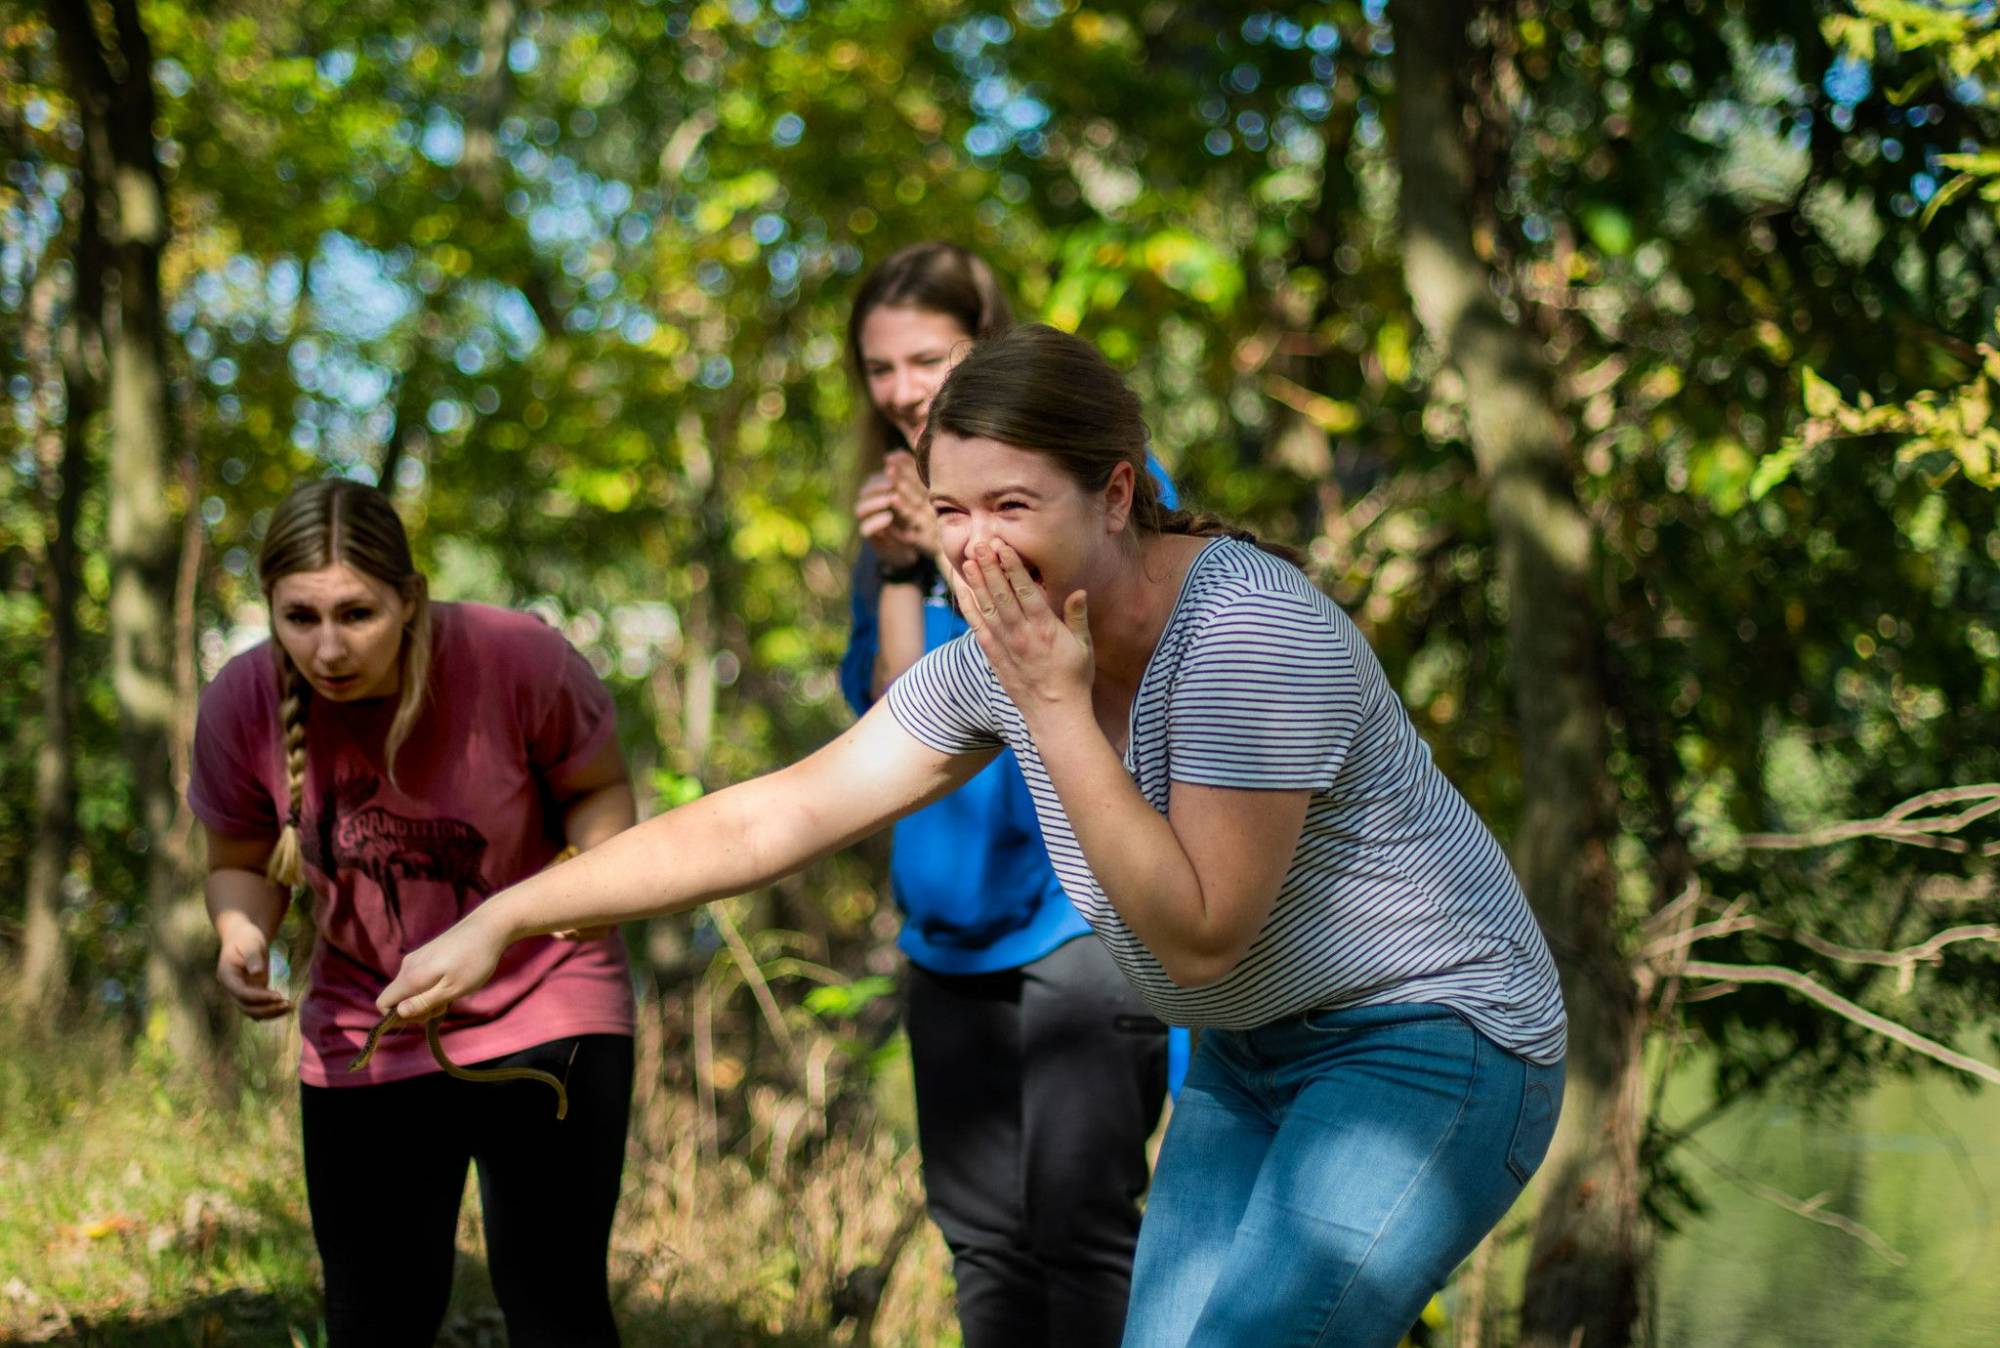 Herpetology students make a discovery in the ravines near campus